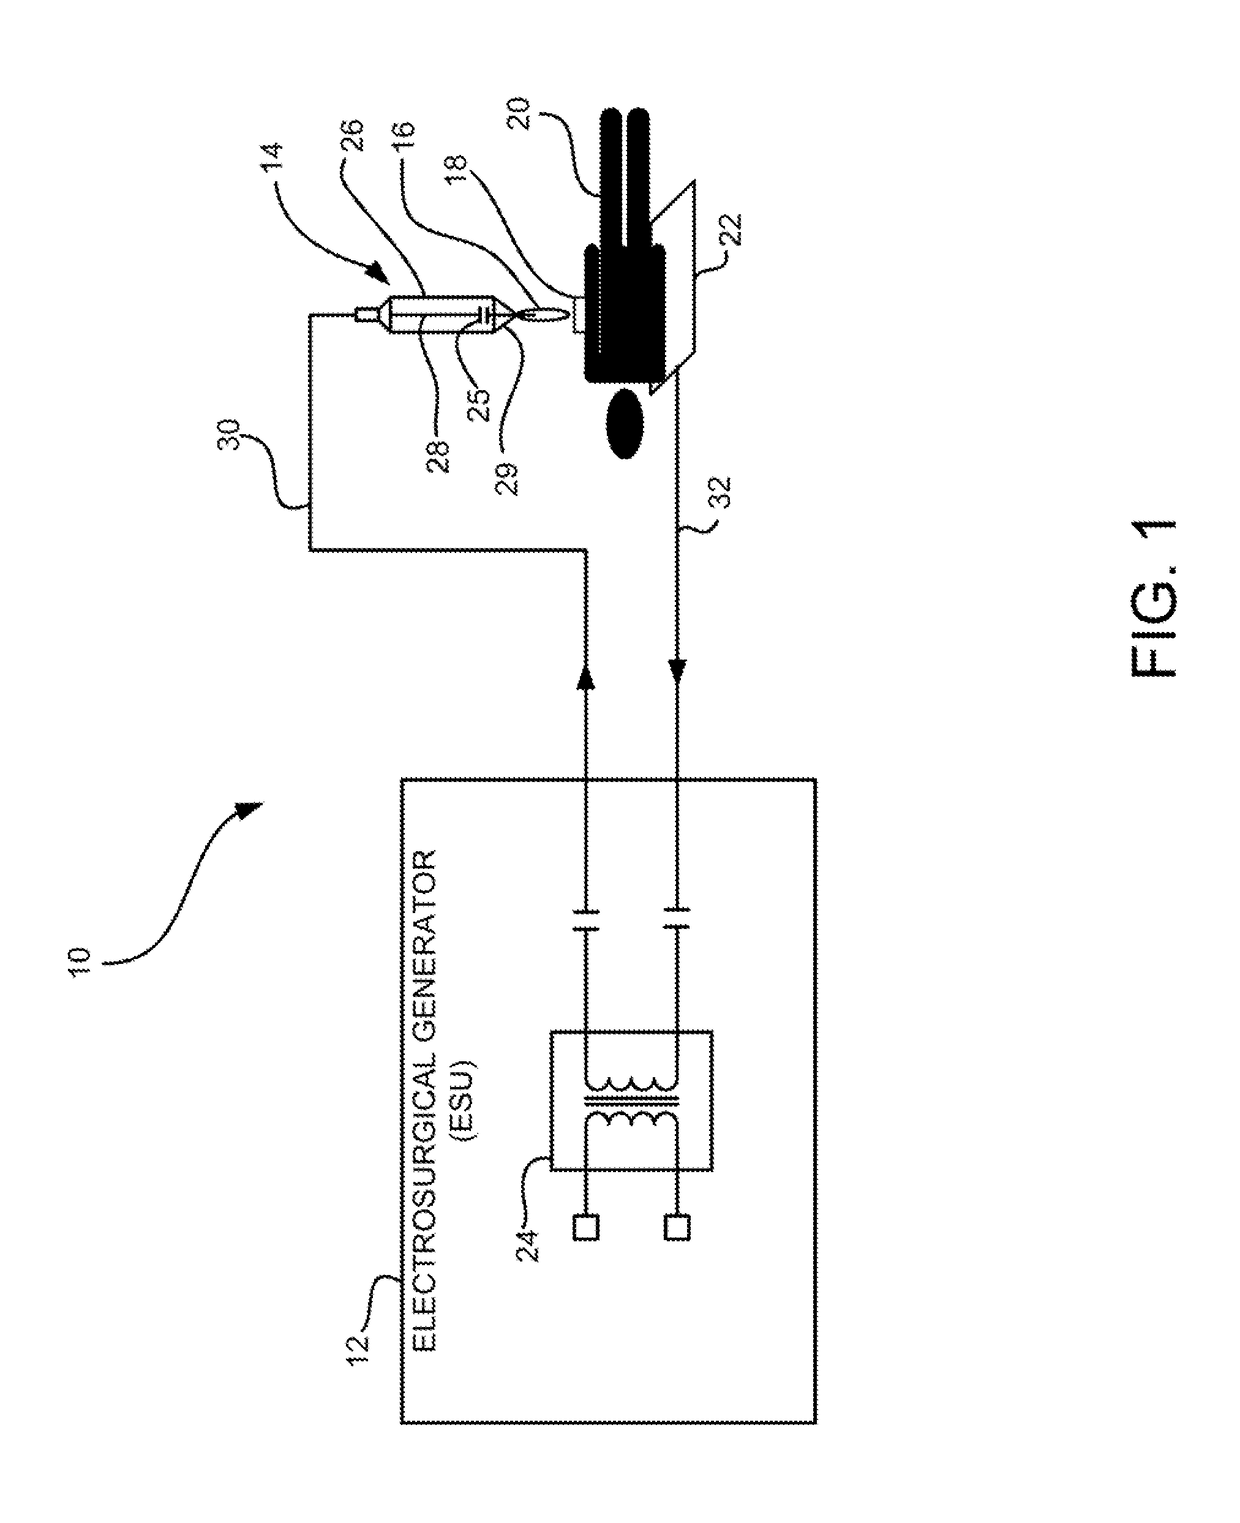 System and method for identifying and controlling an electrosurgical apparatus